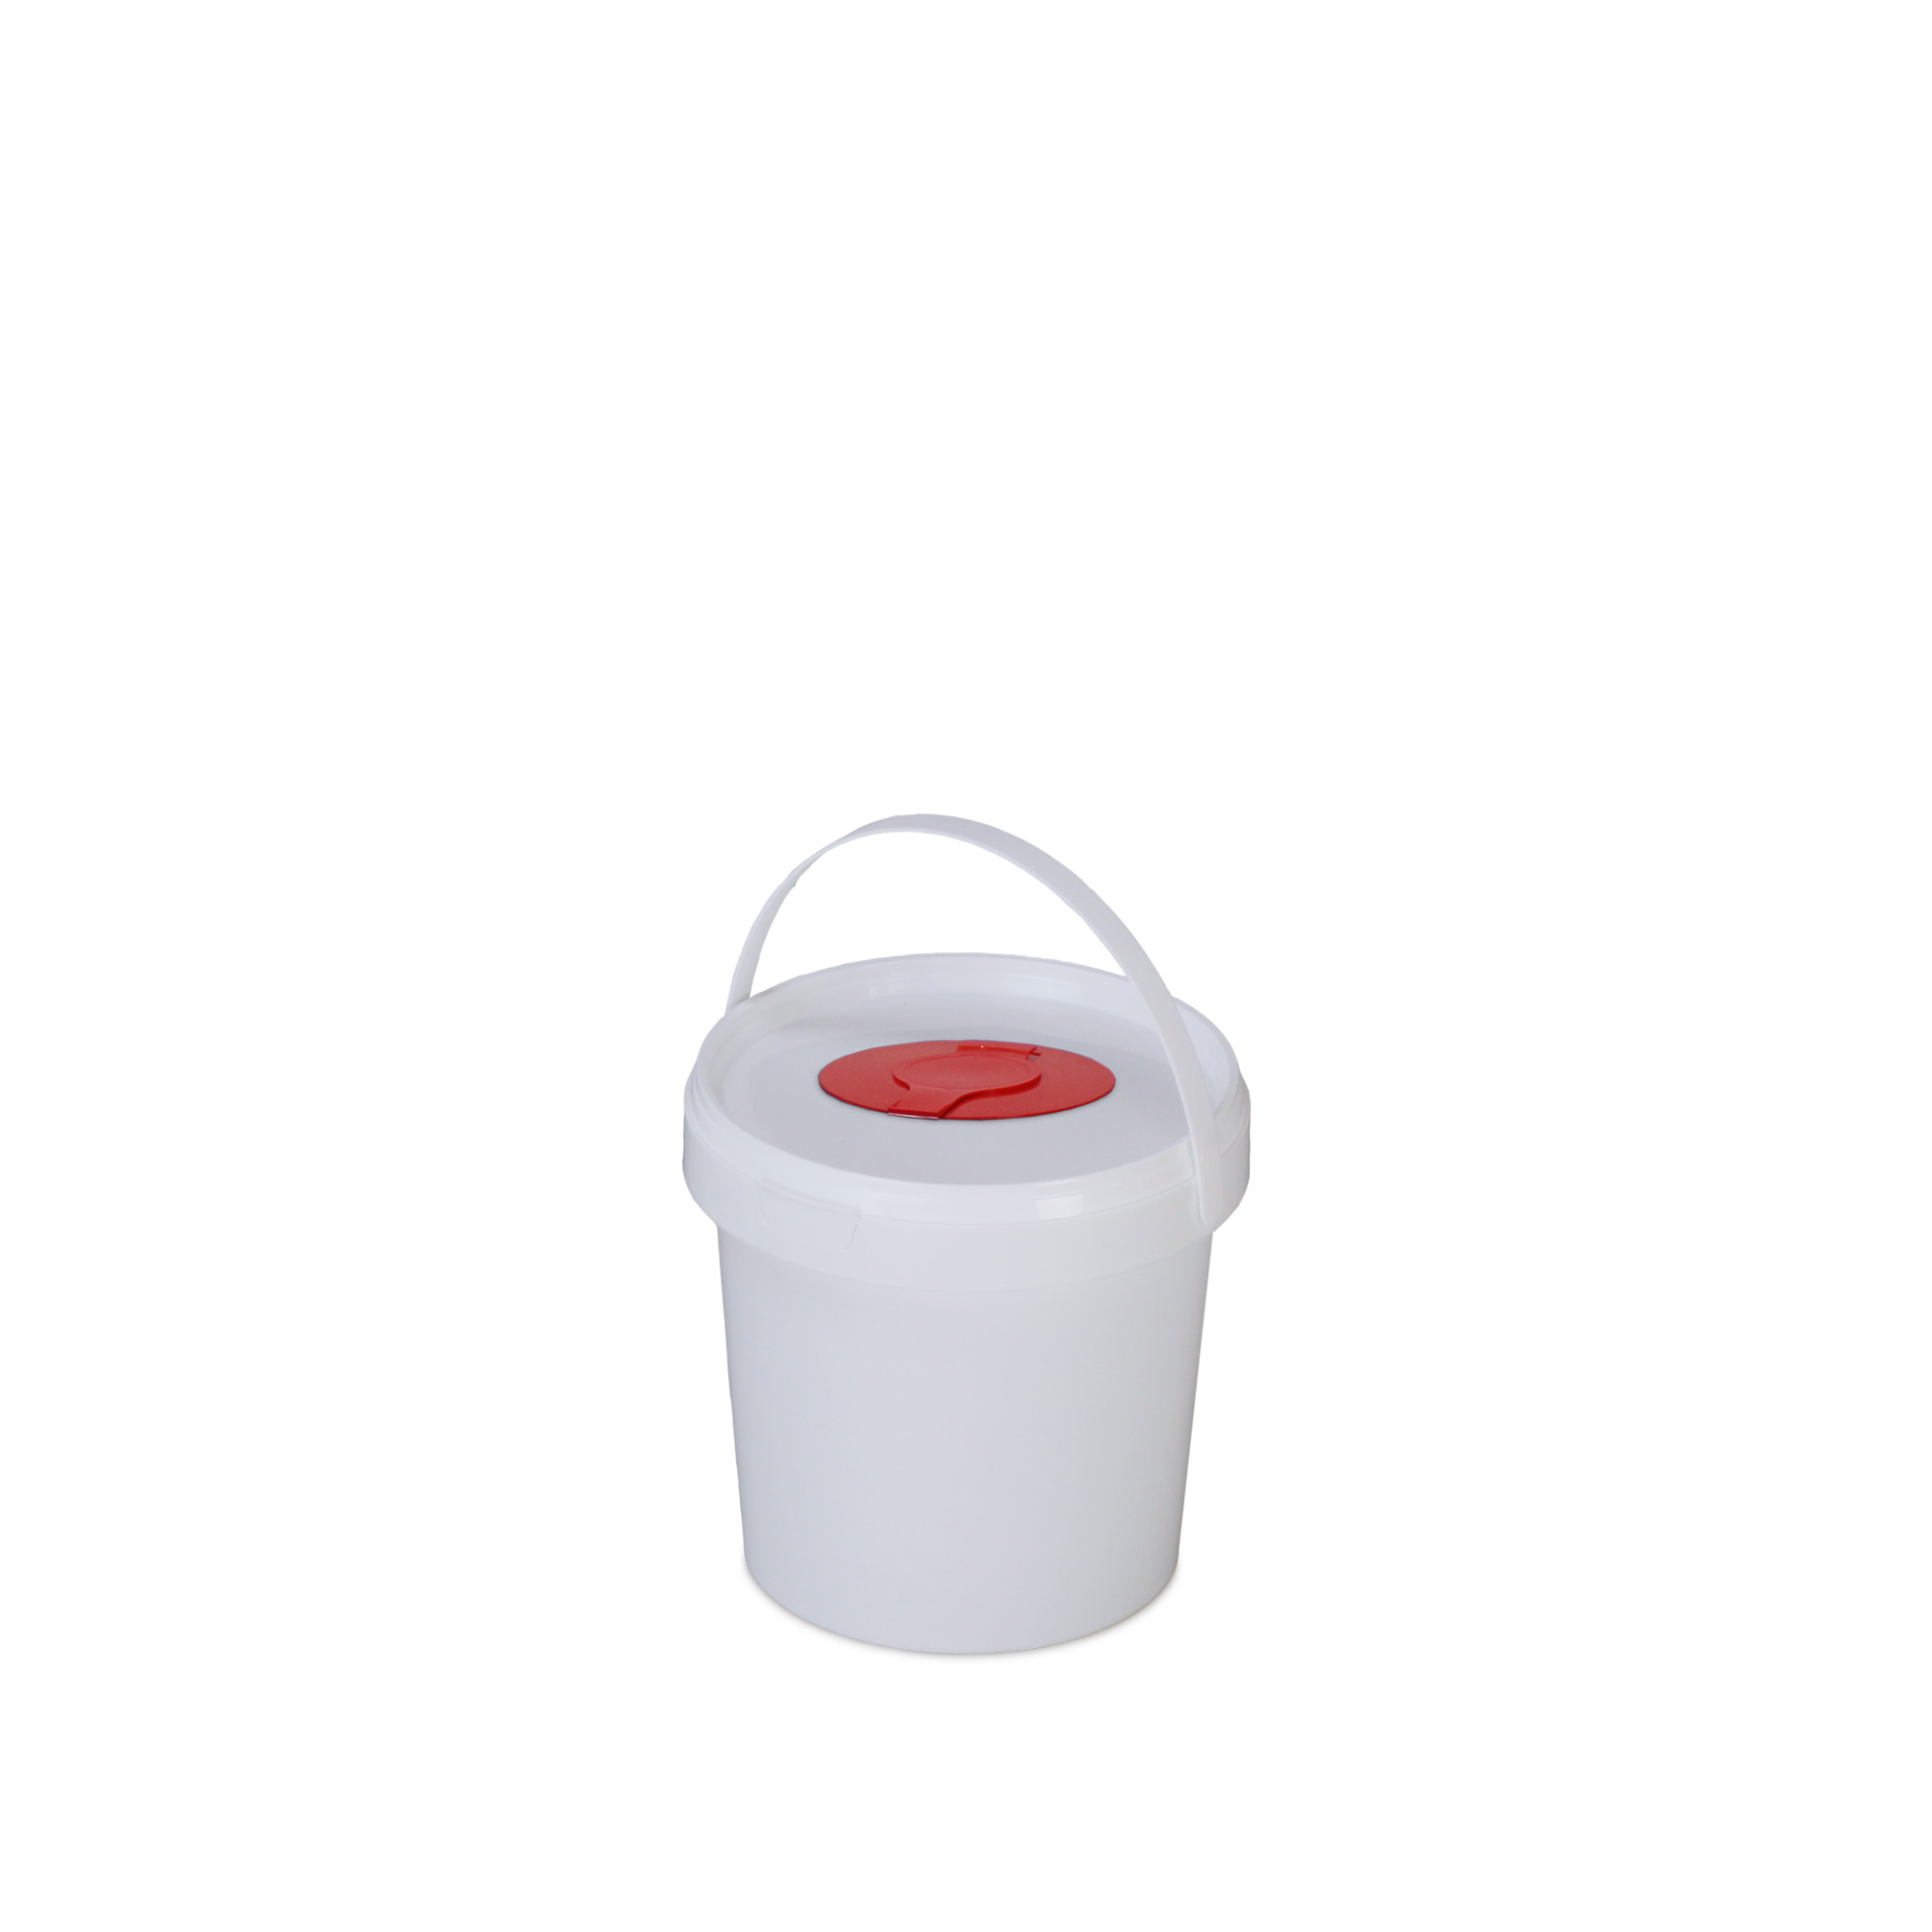 IPL Industrial Series 1 Gallon Round Plastic Container with Handle